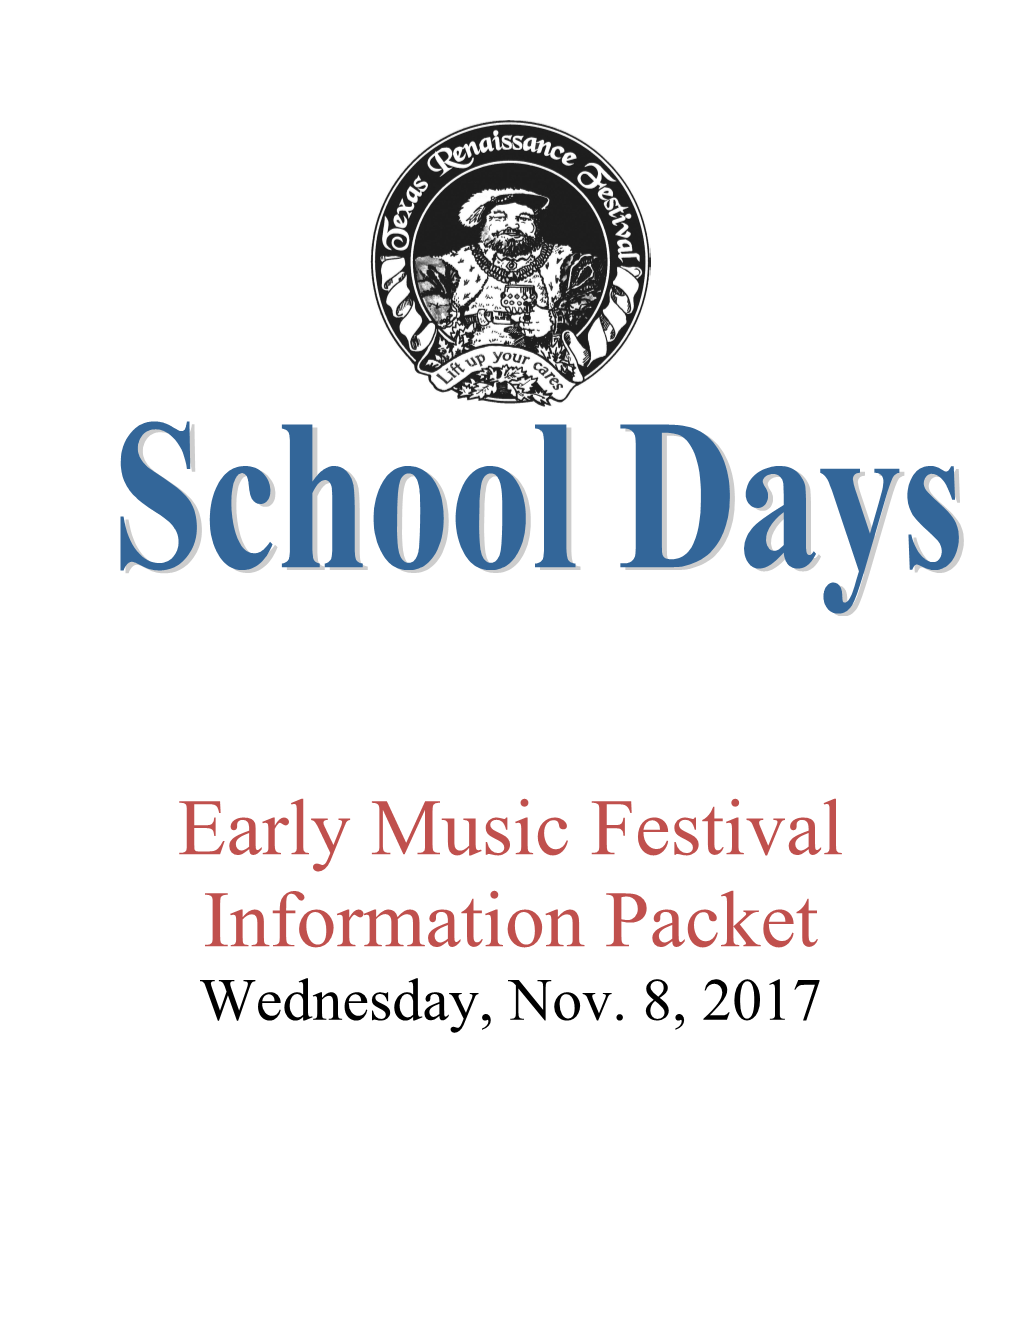 What Are School Days at the Texas Renaissance Festival?